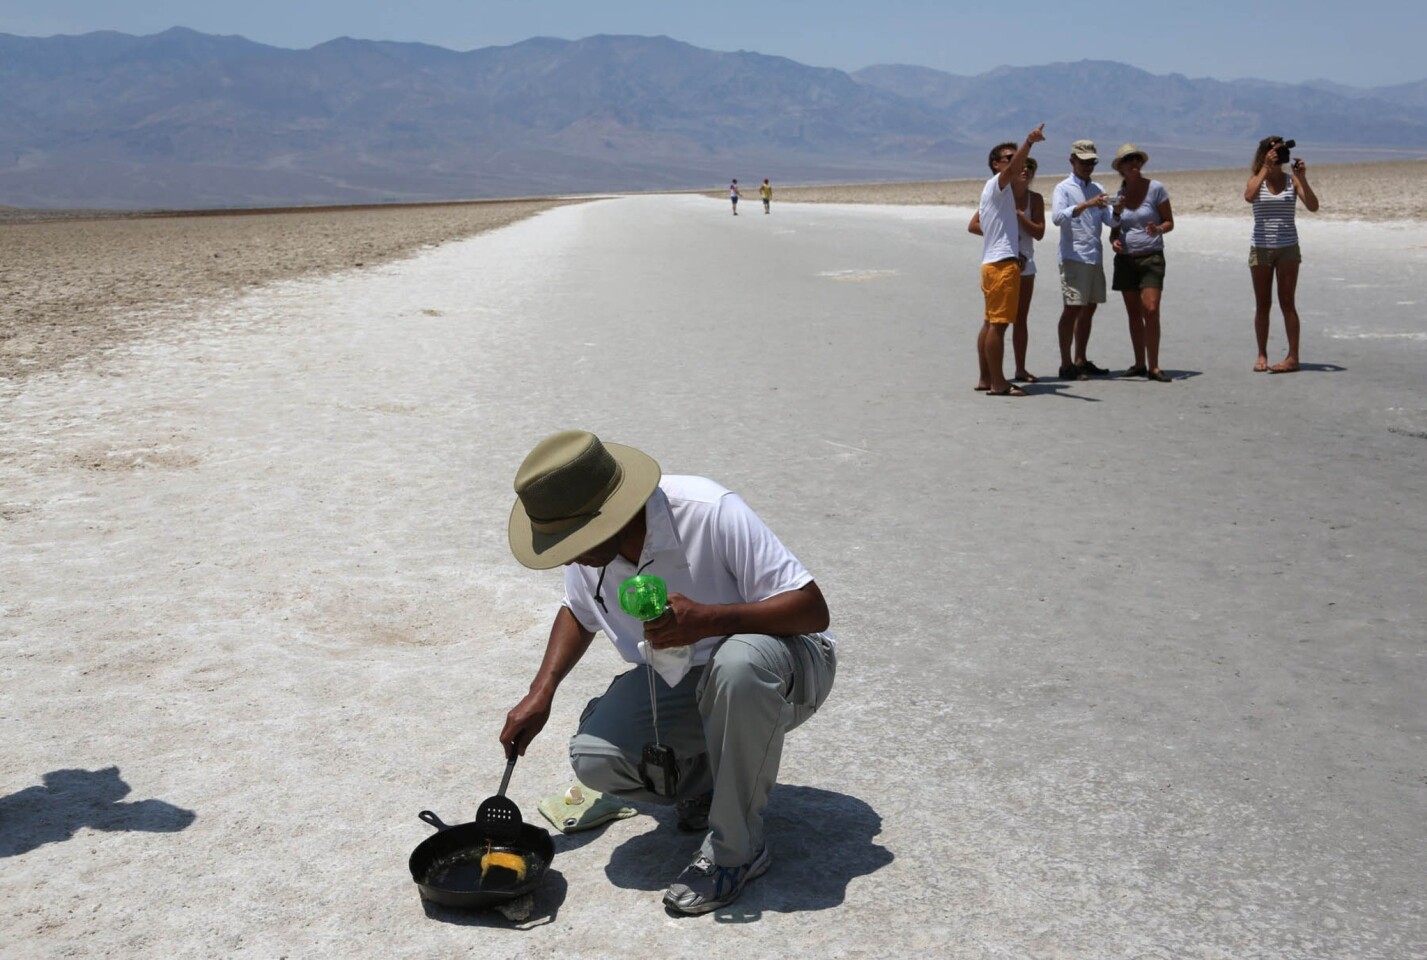 Randy Thomas of Vacaville, Calif., tries to fry an egg on the salt flats in Death Valley's Badwater Basin. He drove there to experience the heat.